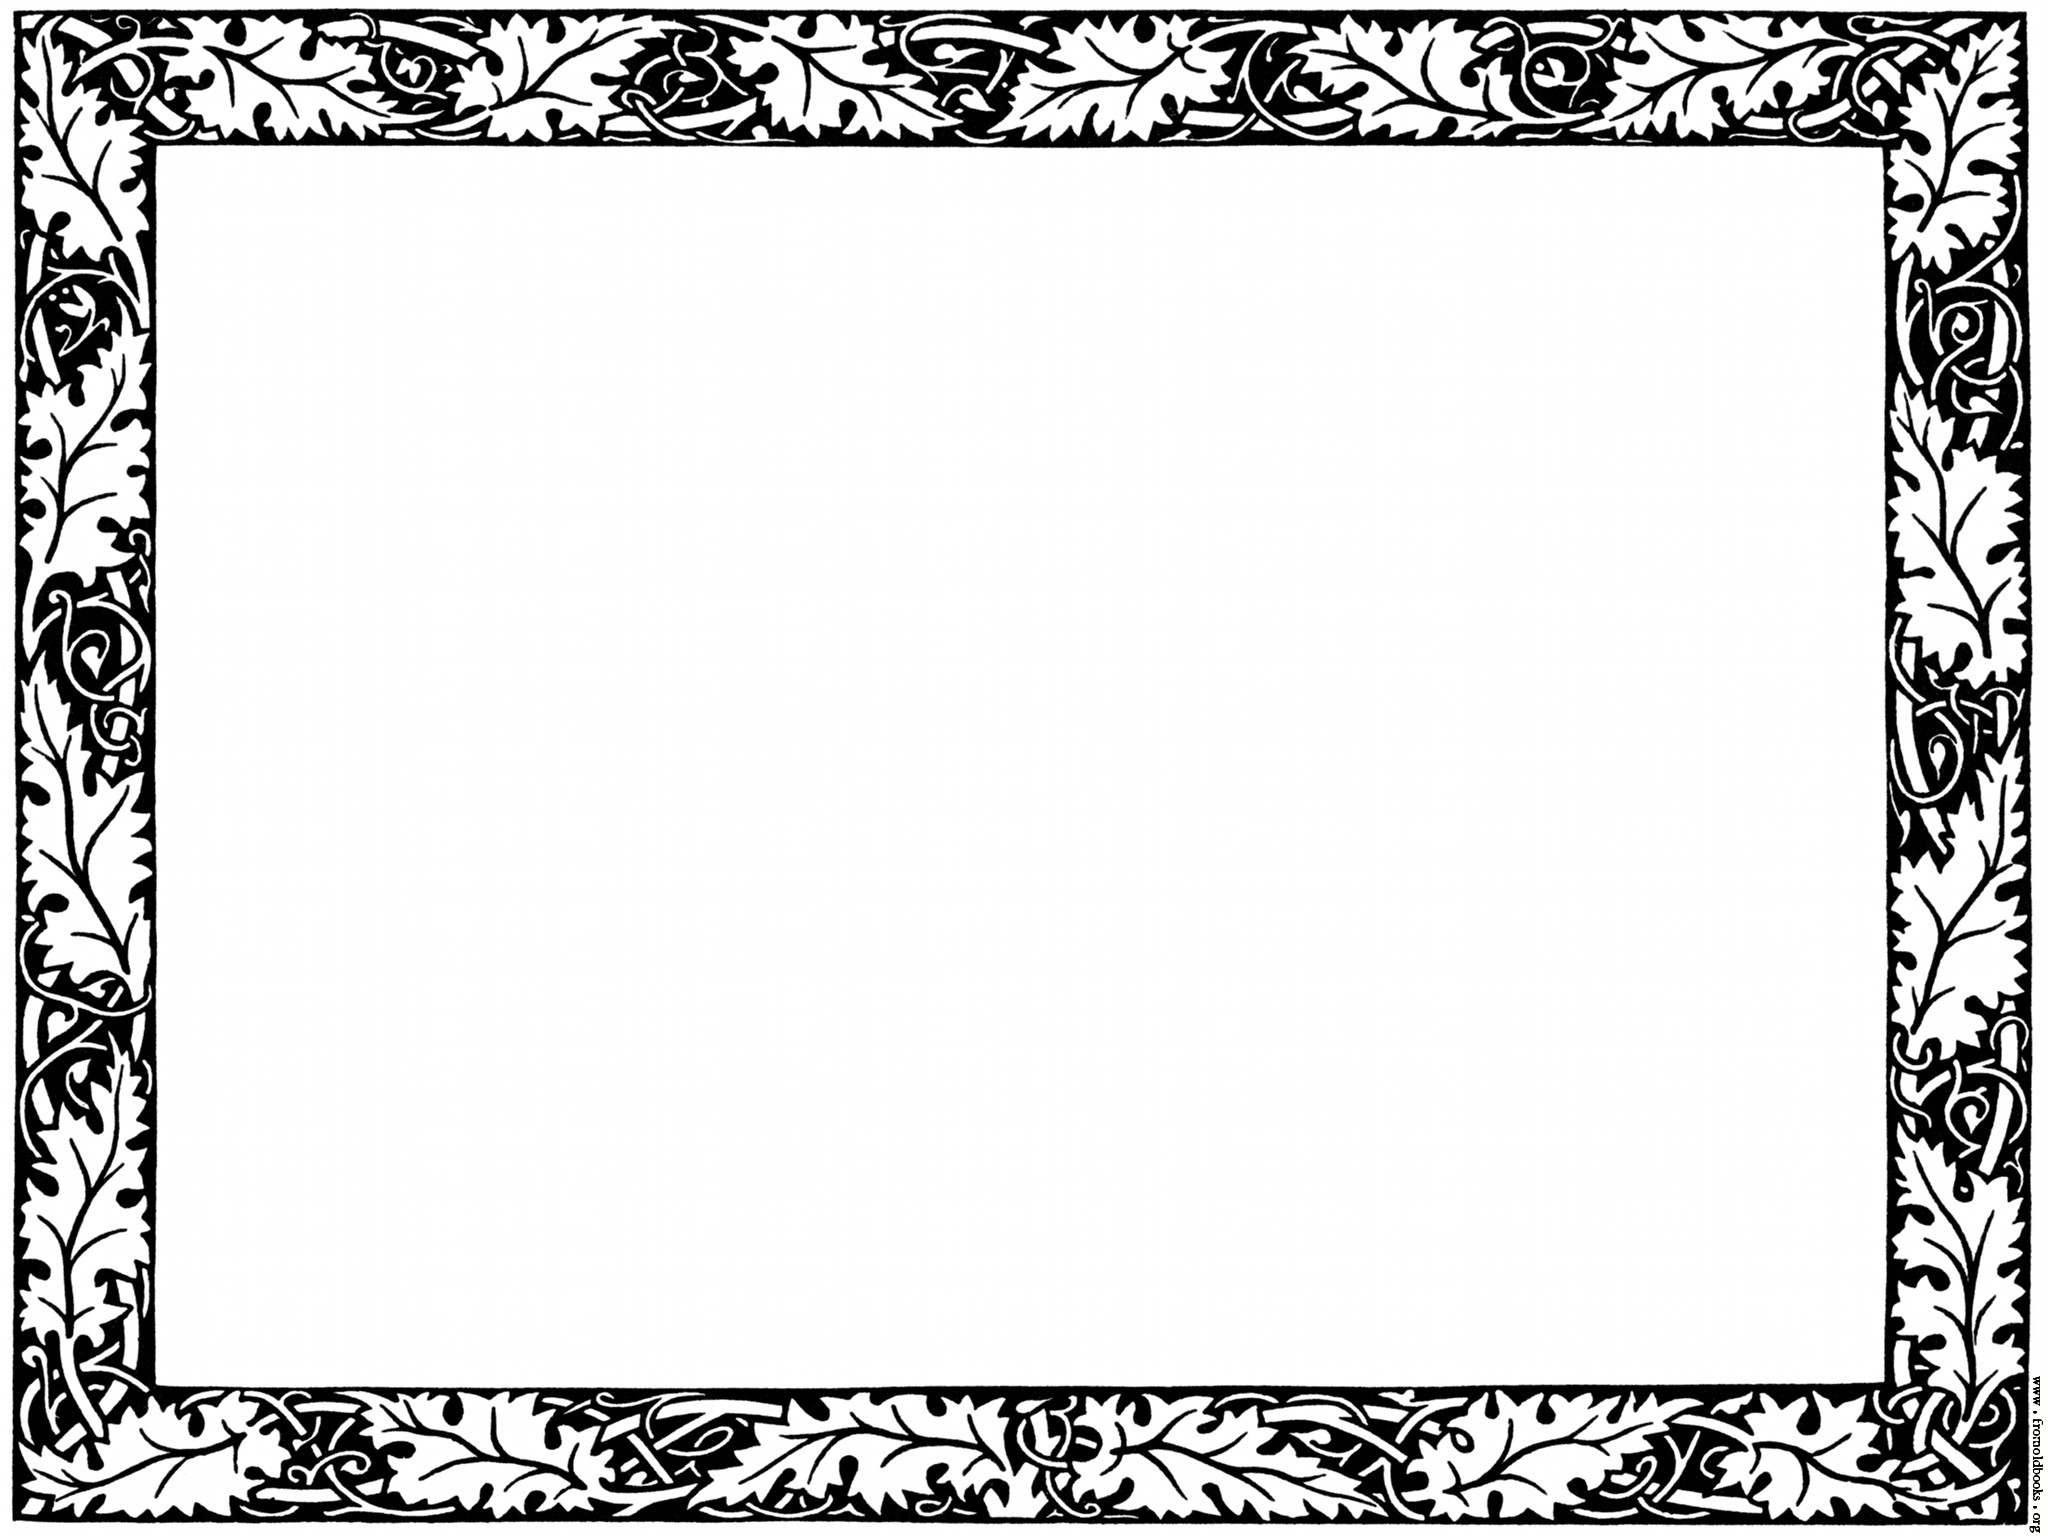 Royalty Free Borders - ClipArt Best